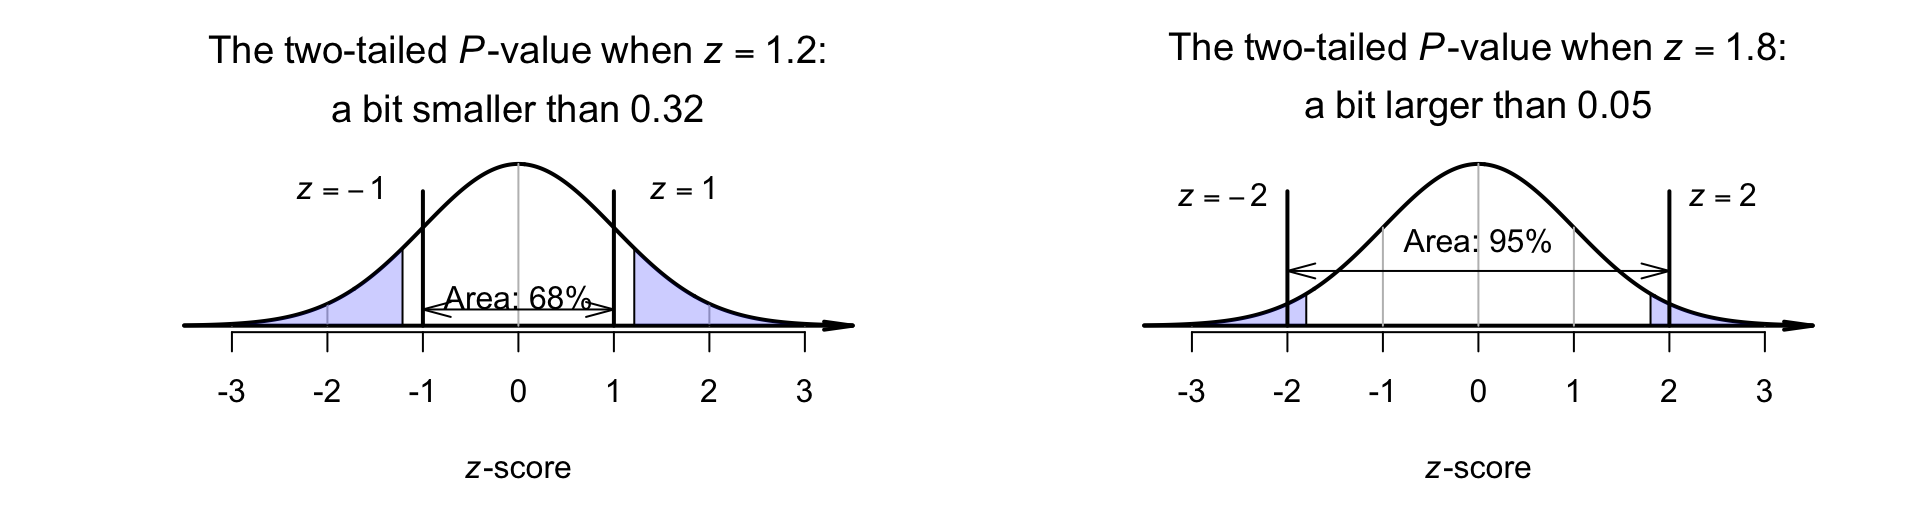 The two-tailed $P$-value is the combined area in the two tails of the distribution. Left panel: when $z = 1.2$ (or $z = -1.2$). Right panel: when $z = 1.8$ (or $z = -1.8$).